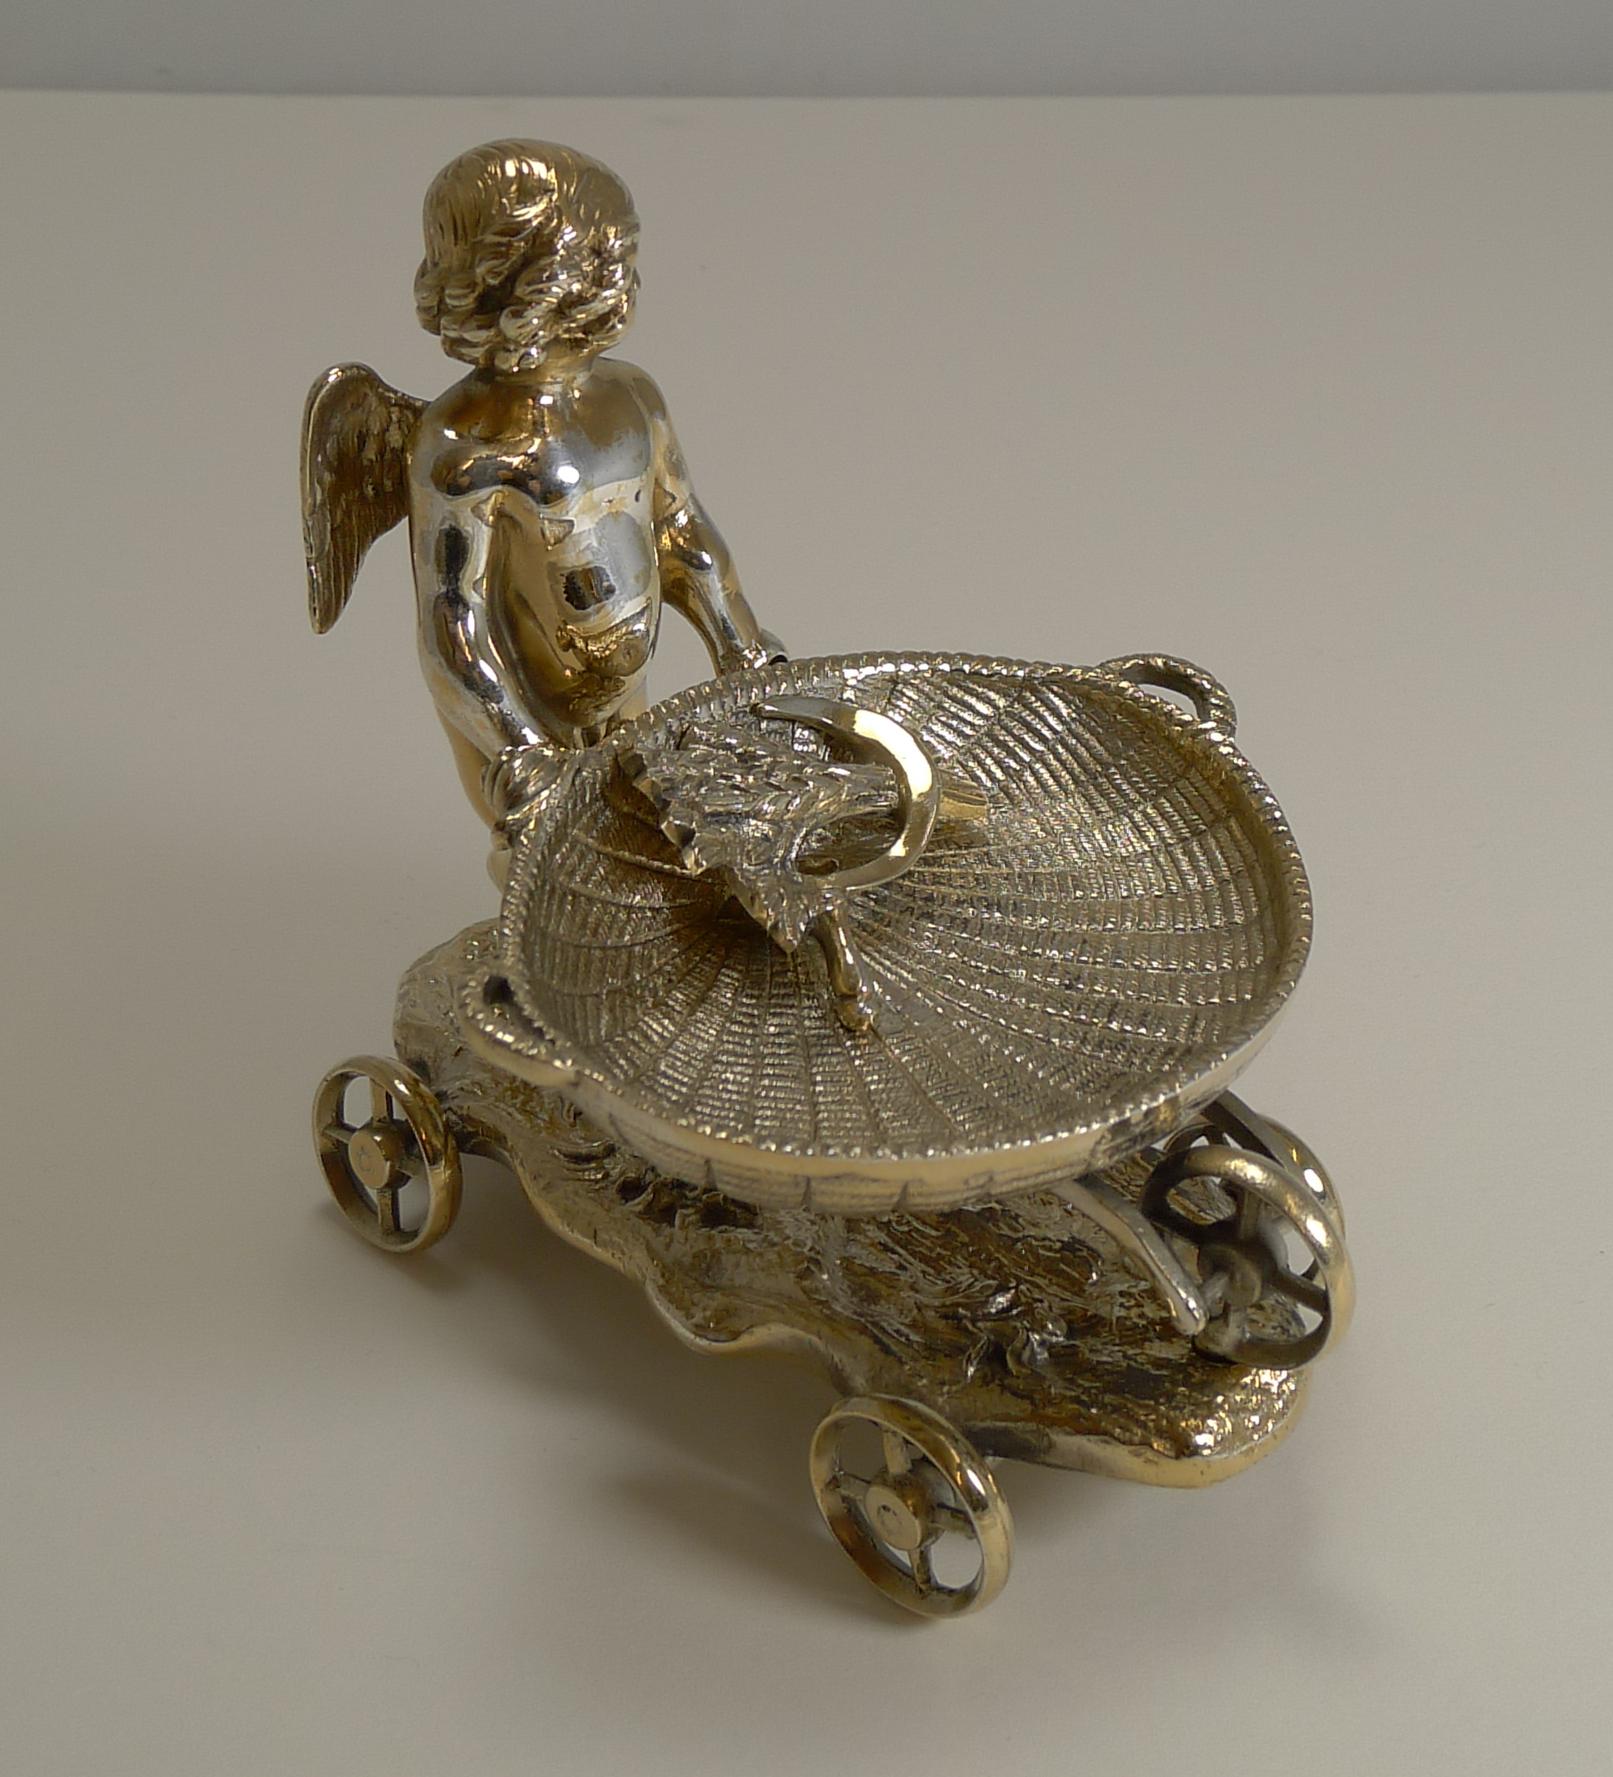 Dating to circa 1890, I haven't had an open salt like this for several years, this Victorian figural silver plated salt is as charming as they get.

The wheels move, to push around the dinner table, the adorable winged cherub is pushing a basket